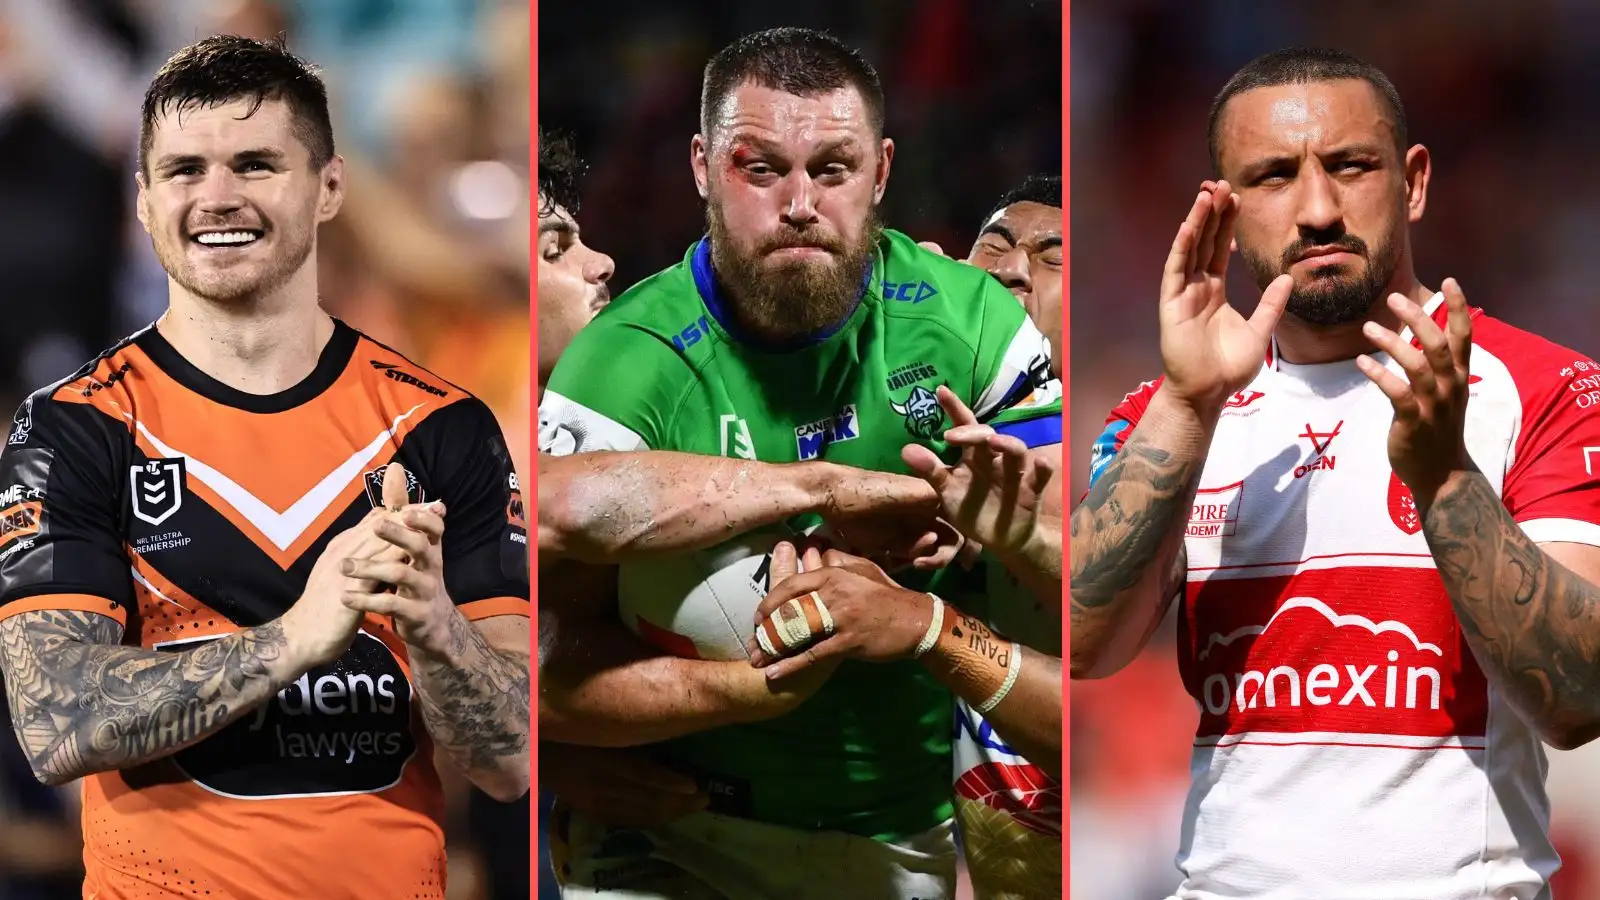 An ultimate 13 of rugby league players born in Bradford including Super League, NRL stars